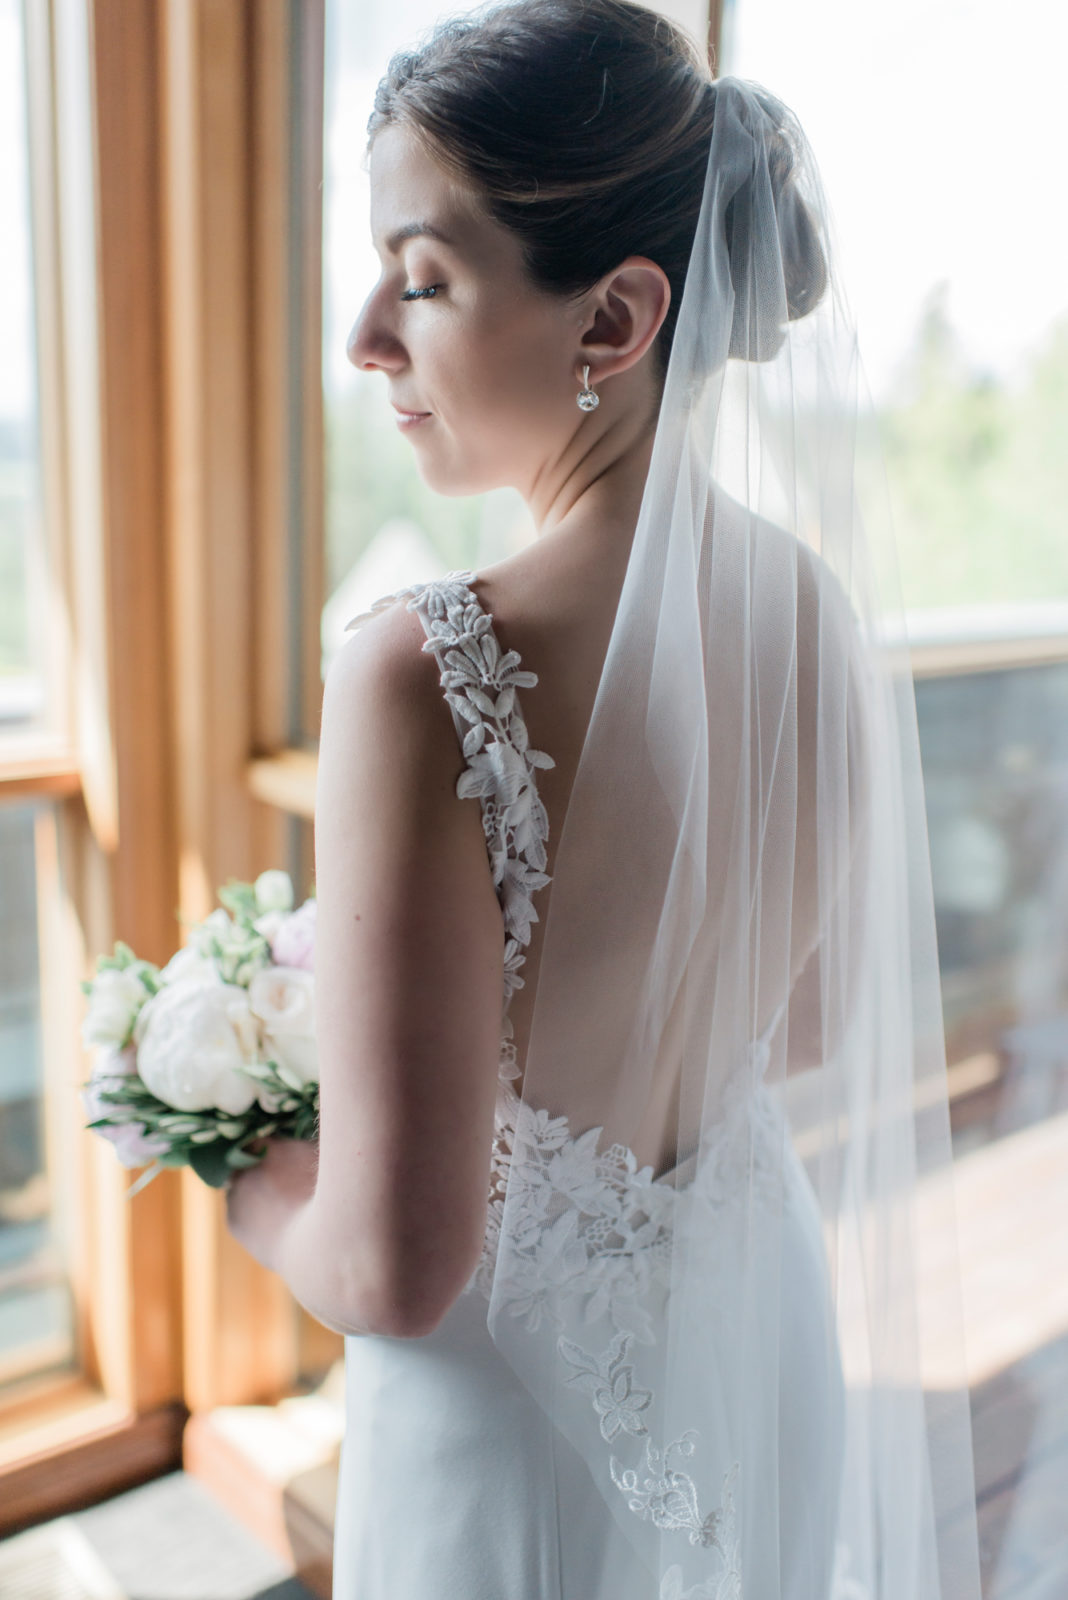 Lovely Blush Wedding at Azuridge with a Tear-Filled First Look - featured on Bronte Bride